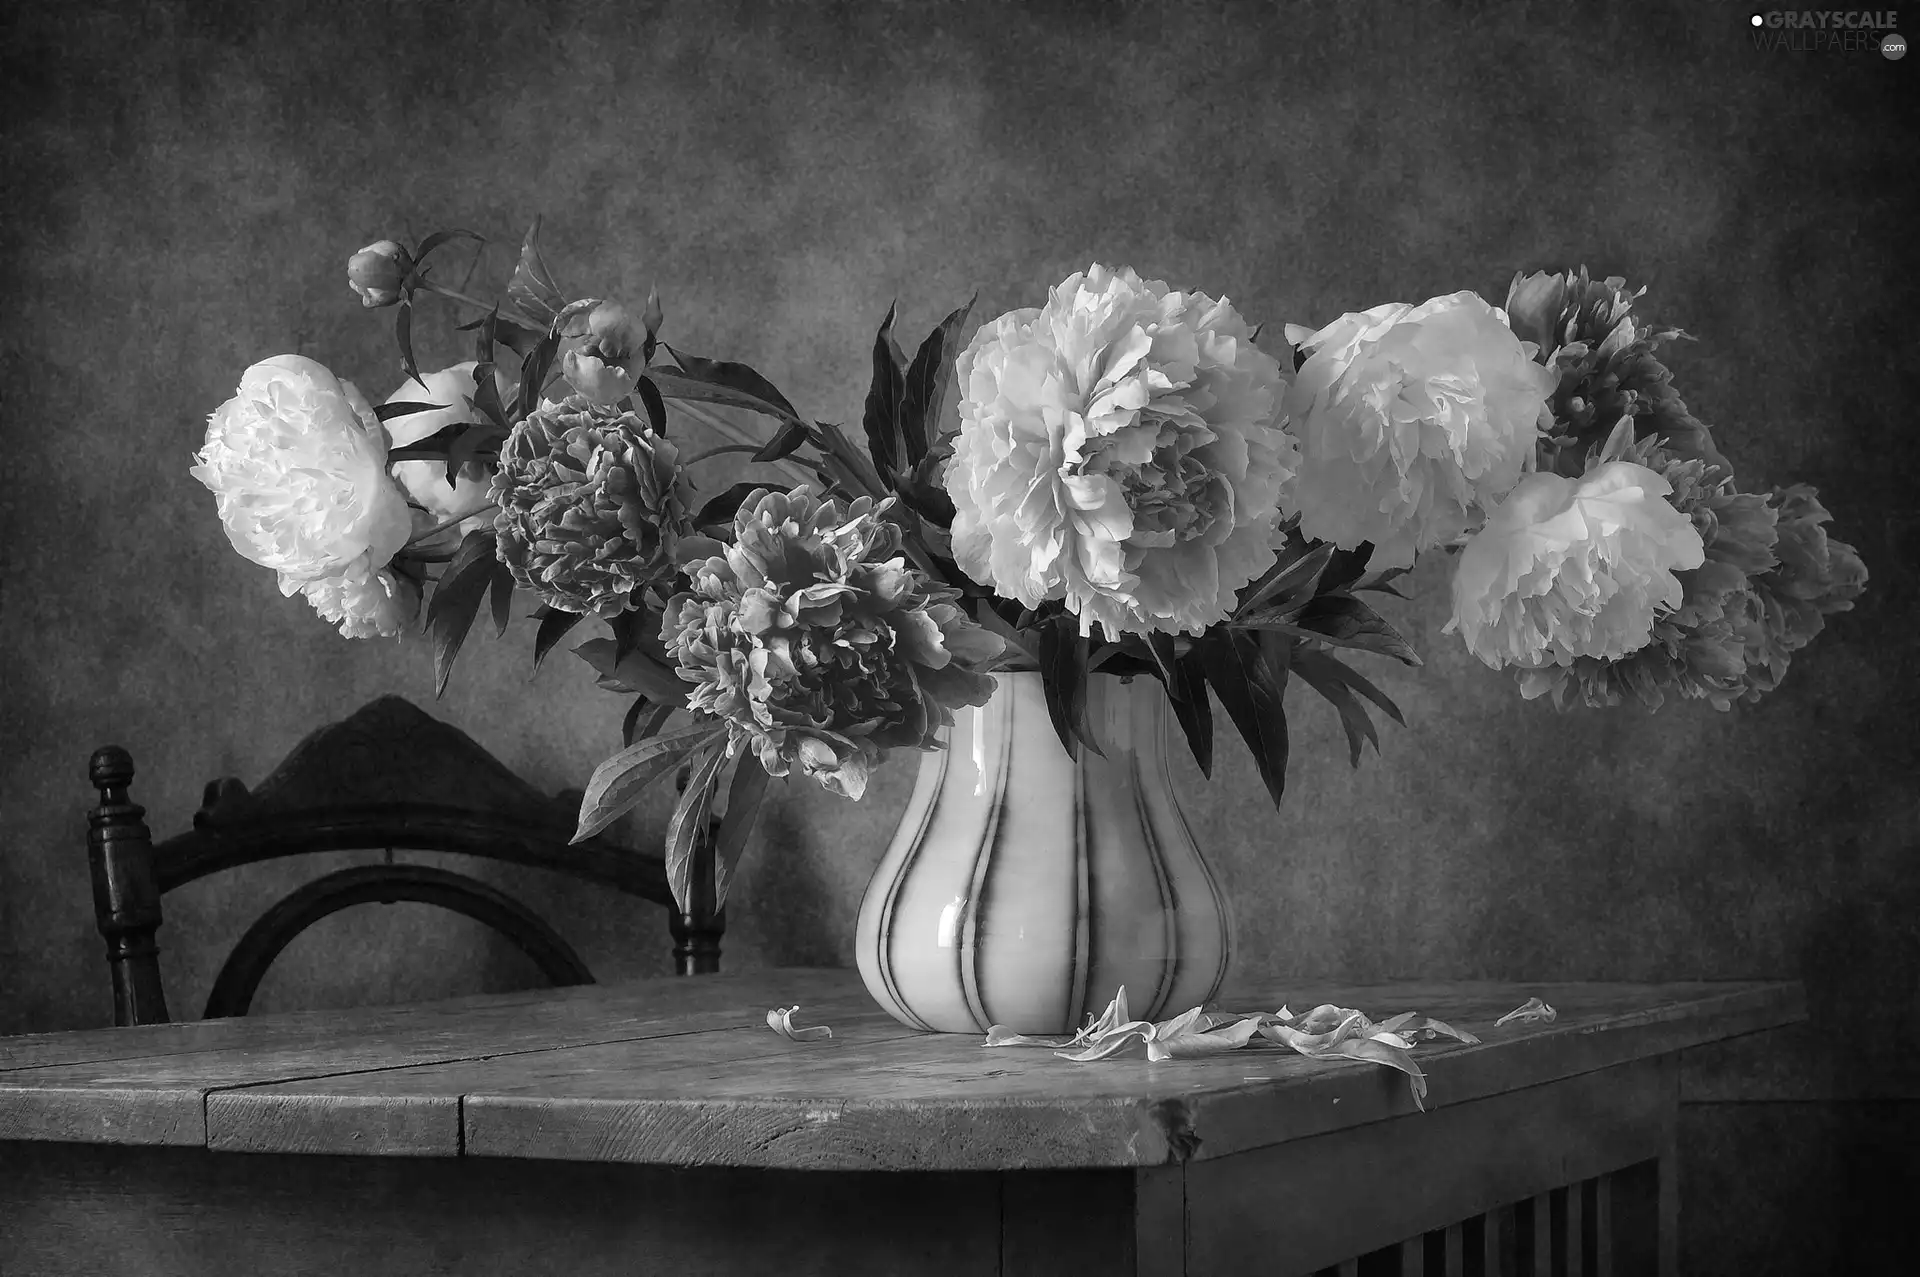 bouquet, Flowers, Table, Chair, Vase, Peonies